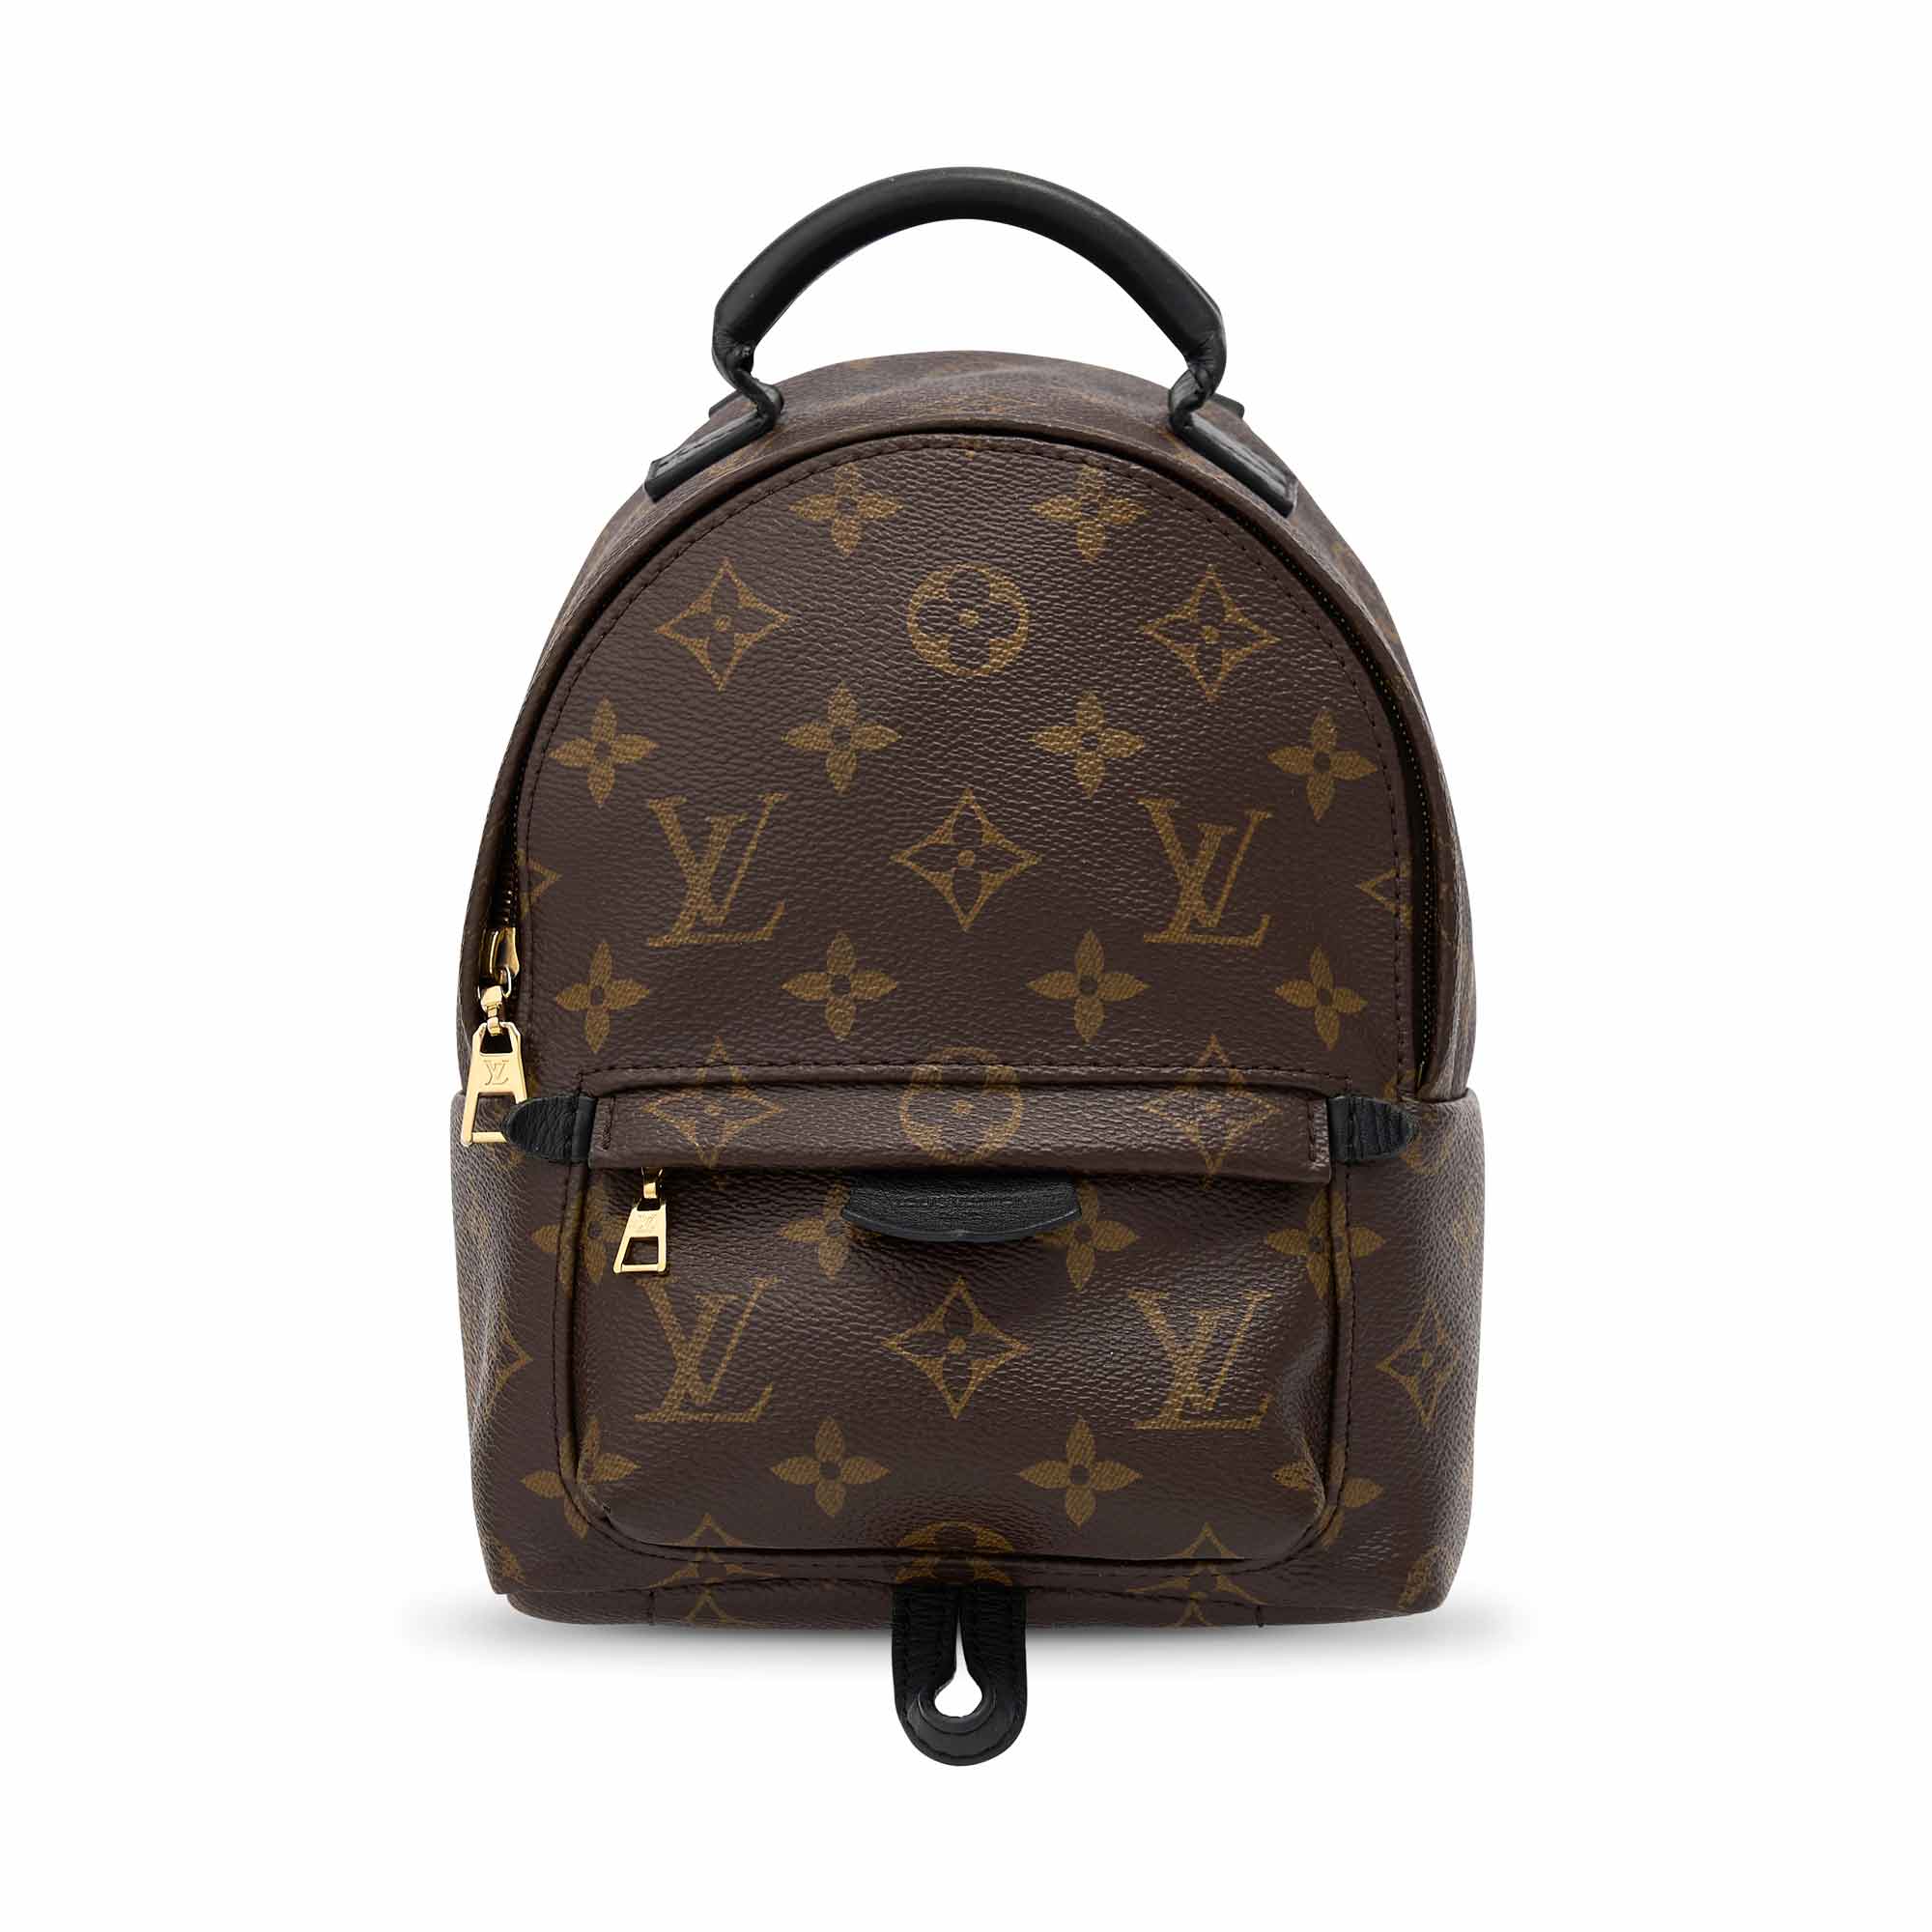 Ba Lô Louis Vuitton Backpack Multipocket Other Leathers Bags BLV05 siêu cấp  like auth 99  DUONG STORE 